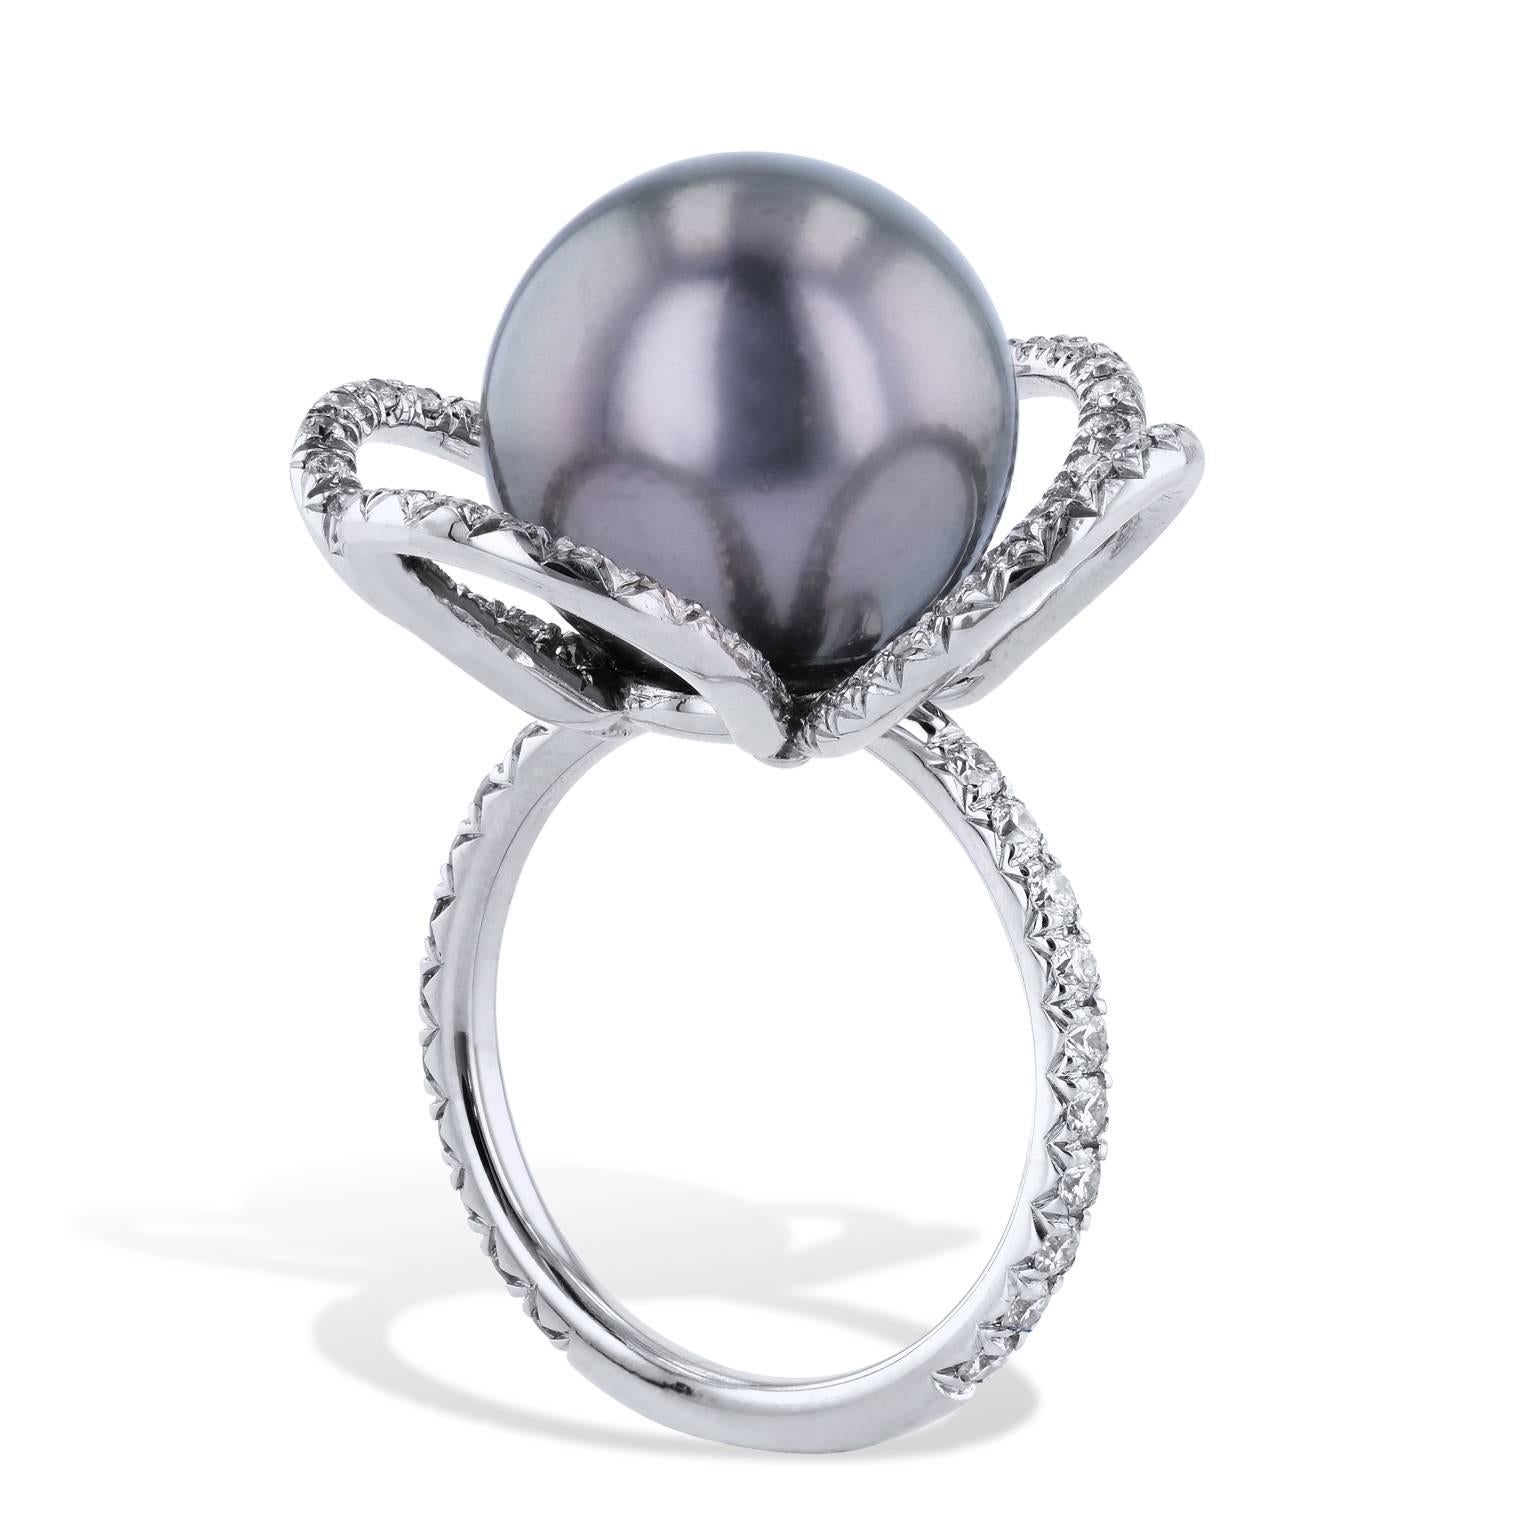 Tahitian Pearl and Diamond Petal 18 kt White Gold Fashion Cocktail Ring Size 5.5

A thirteen millimeter Tahitian pearl is affixed at center, while handmade blooms of pave-set diamonds spring from center like petals as 0.82 carat of diamond (G/H/VS)